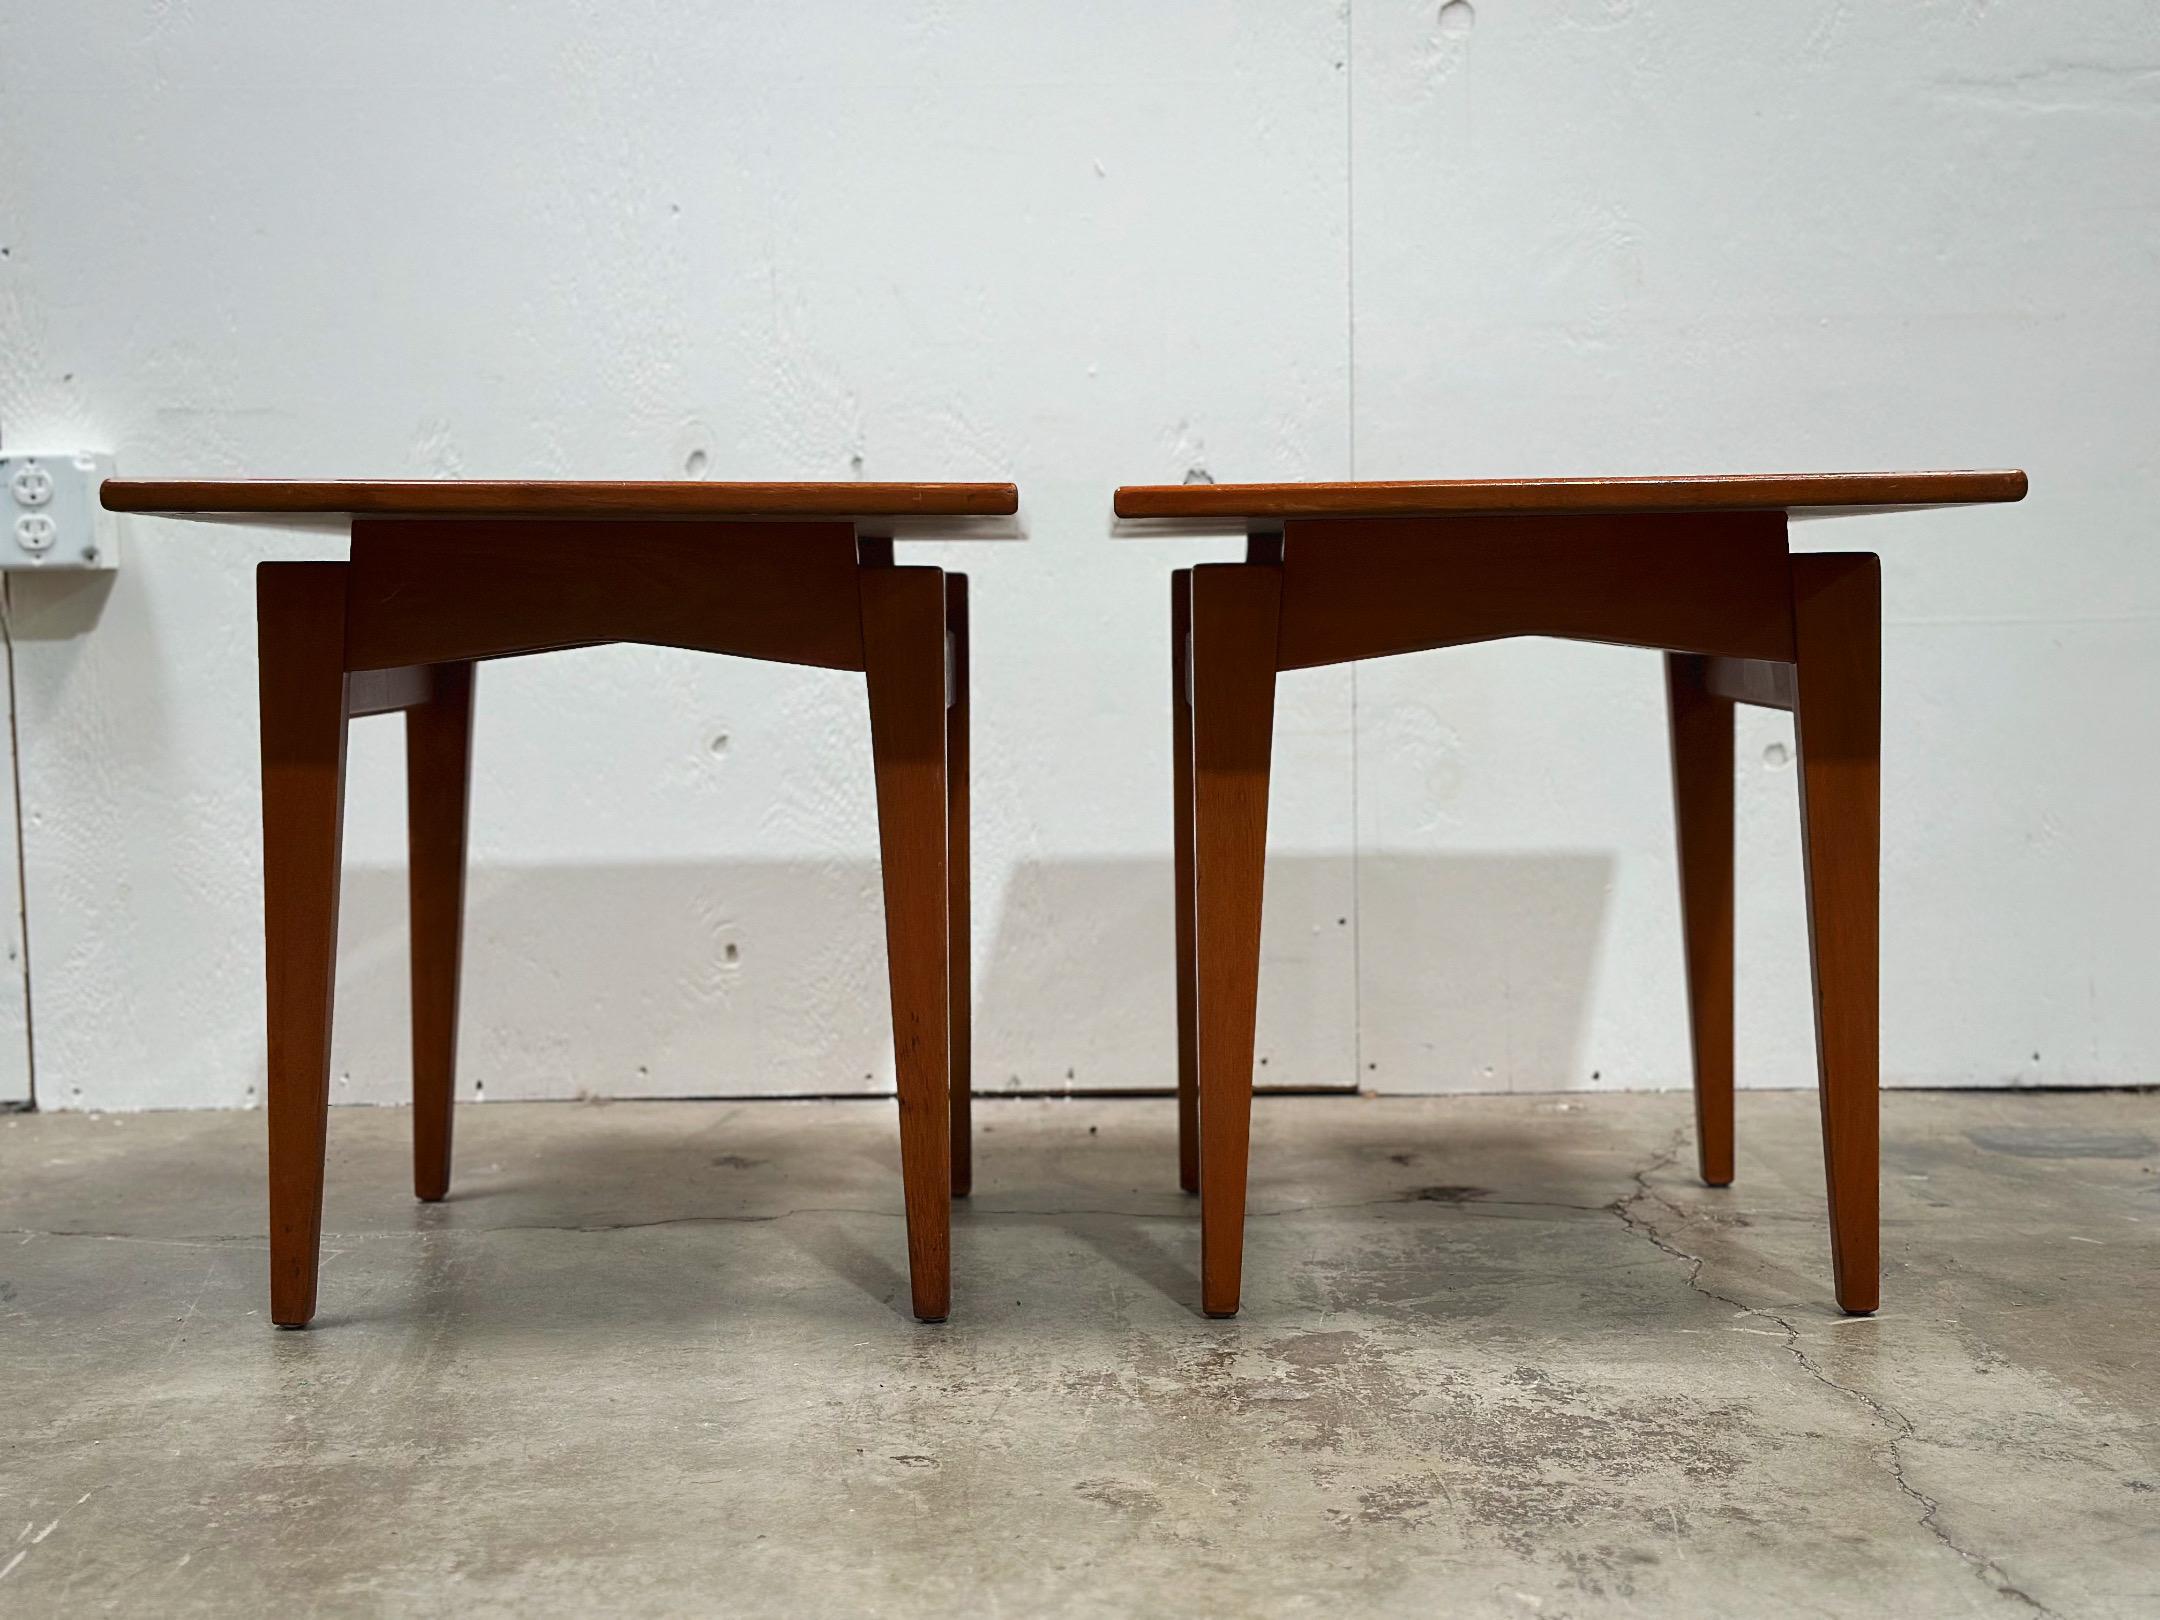 Pair of mid century modern side or end tables by Jens Risom for his company, Jens Risom Design. Classic floating silouhette. Frames are a medium tone solid American walnut. Tops are solid wood with a white formica inlay. Excellent overall condition